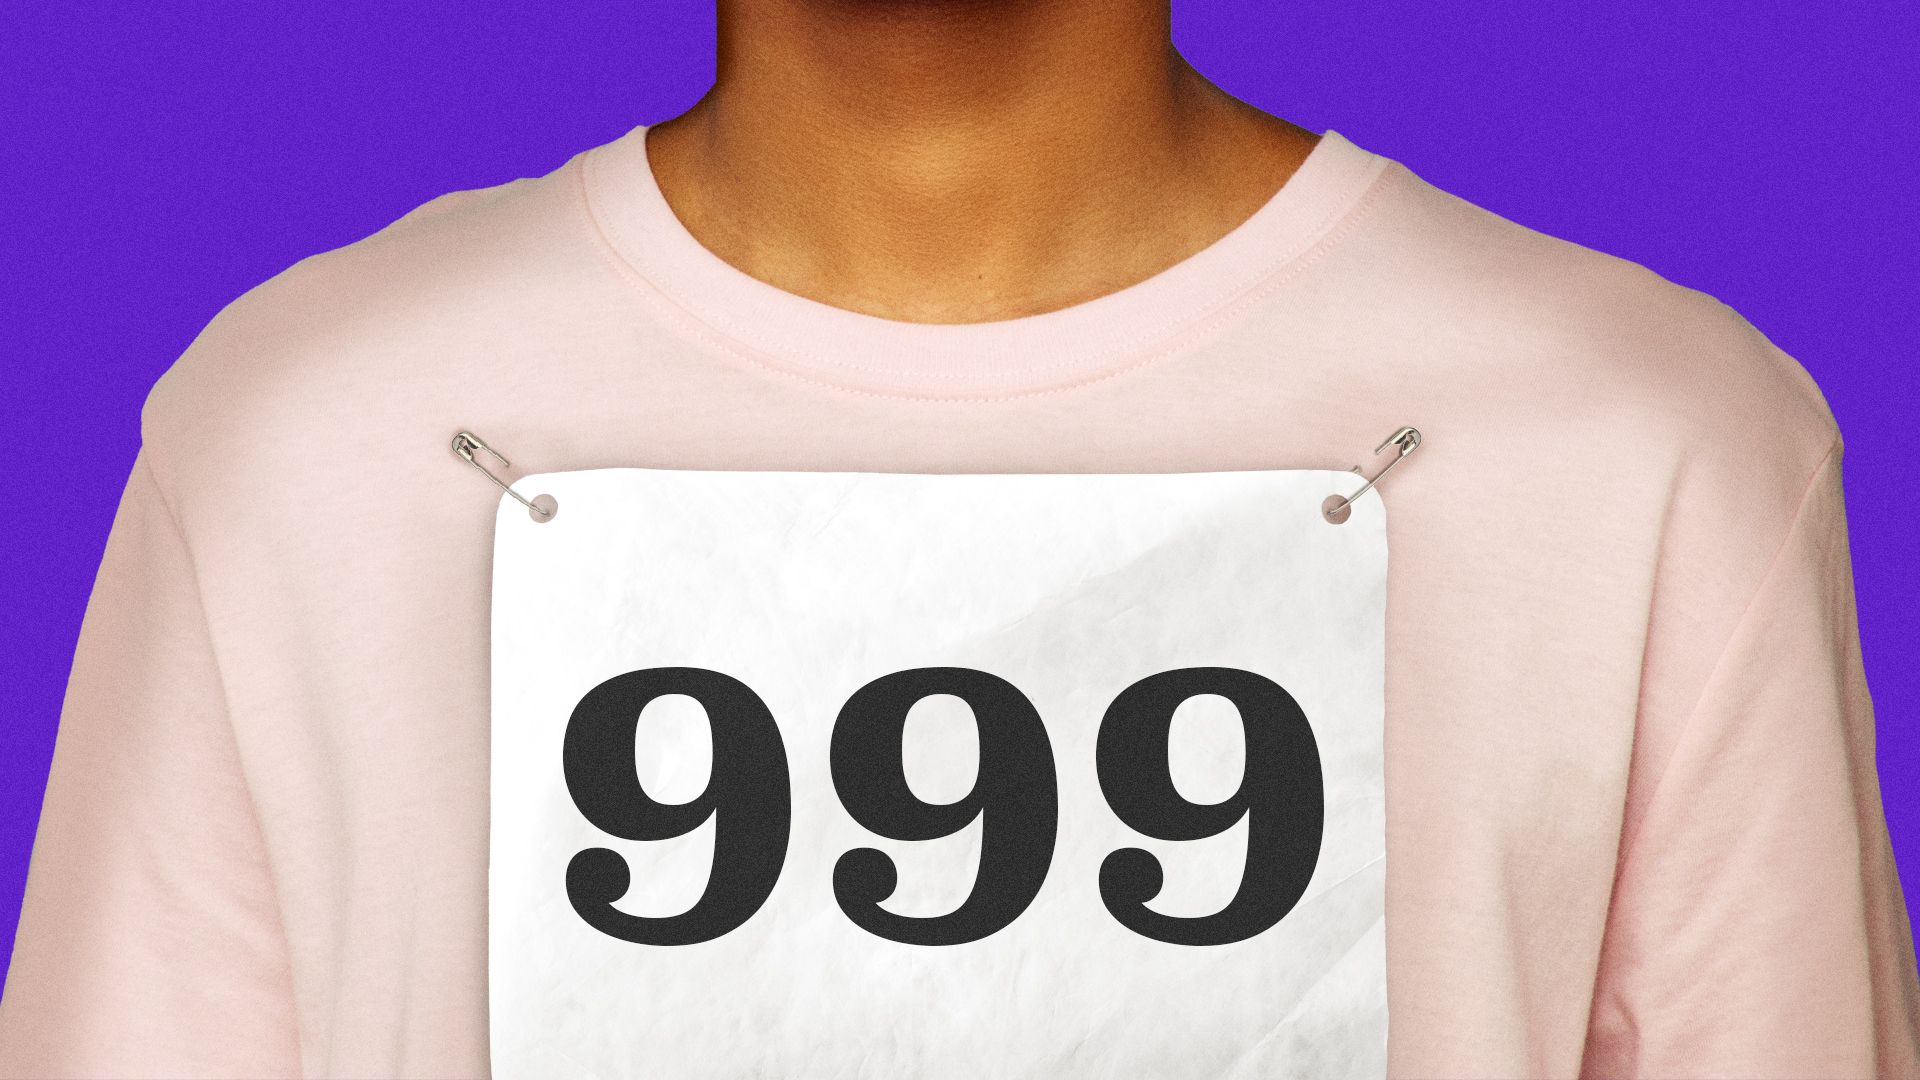 Animated illustration of a runner's bib increasing from 0 to 999.